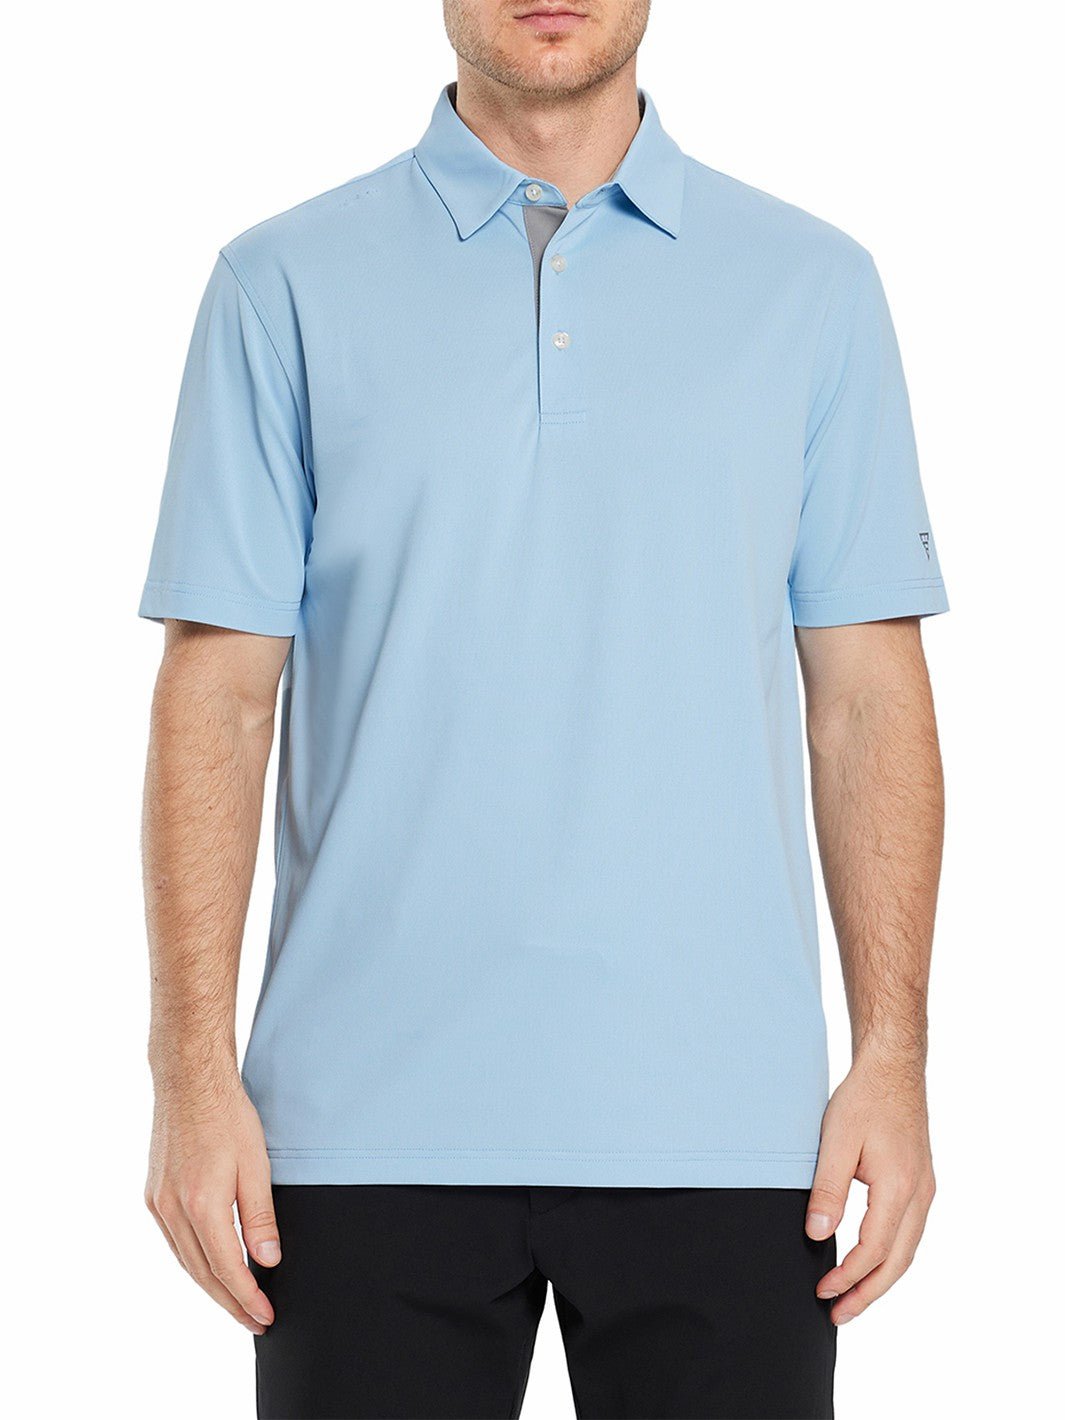 Solid Pique Moisture Wicking Dry Fit Golf Polo Shirts for Men